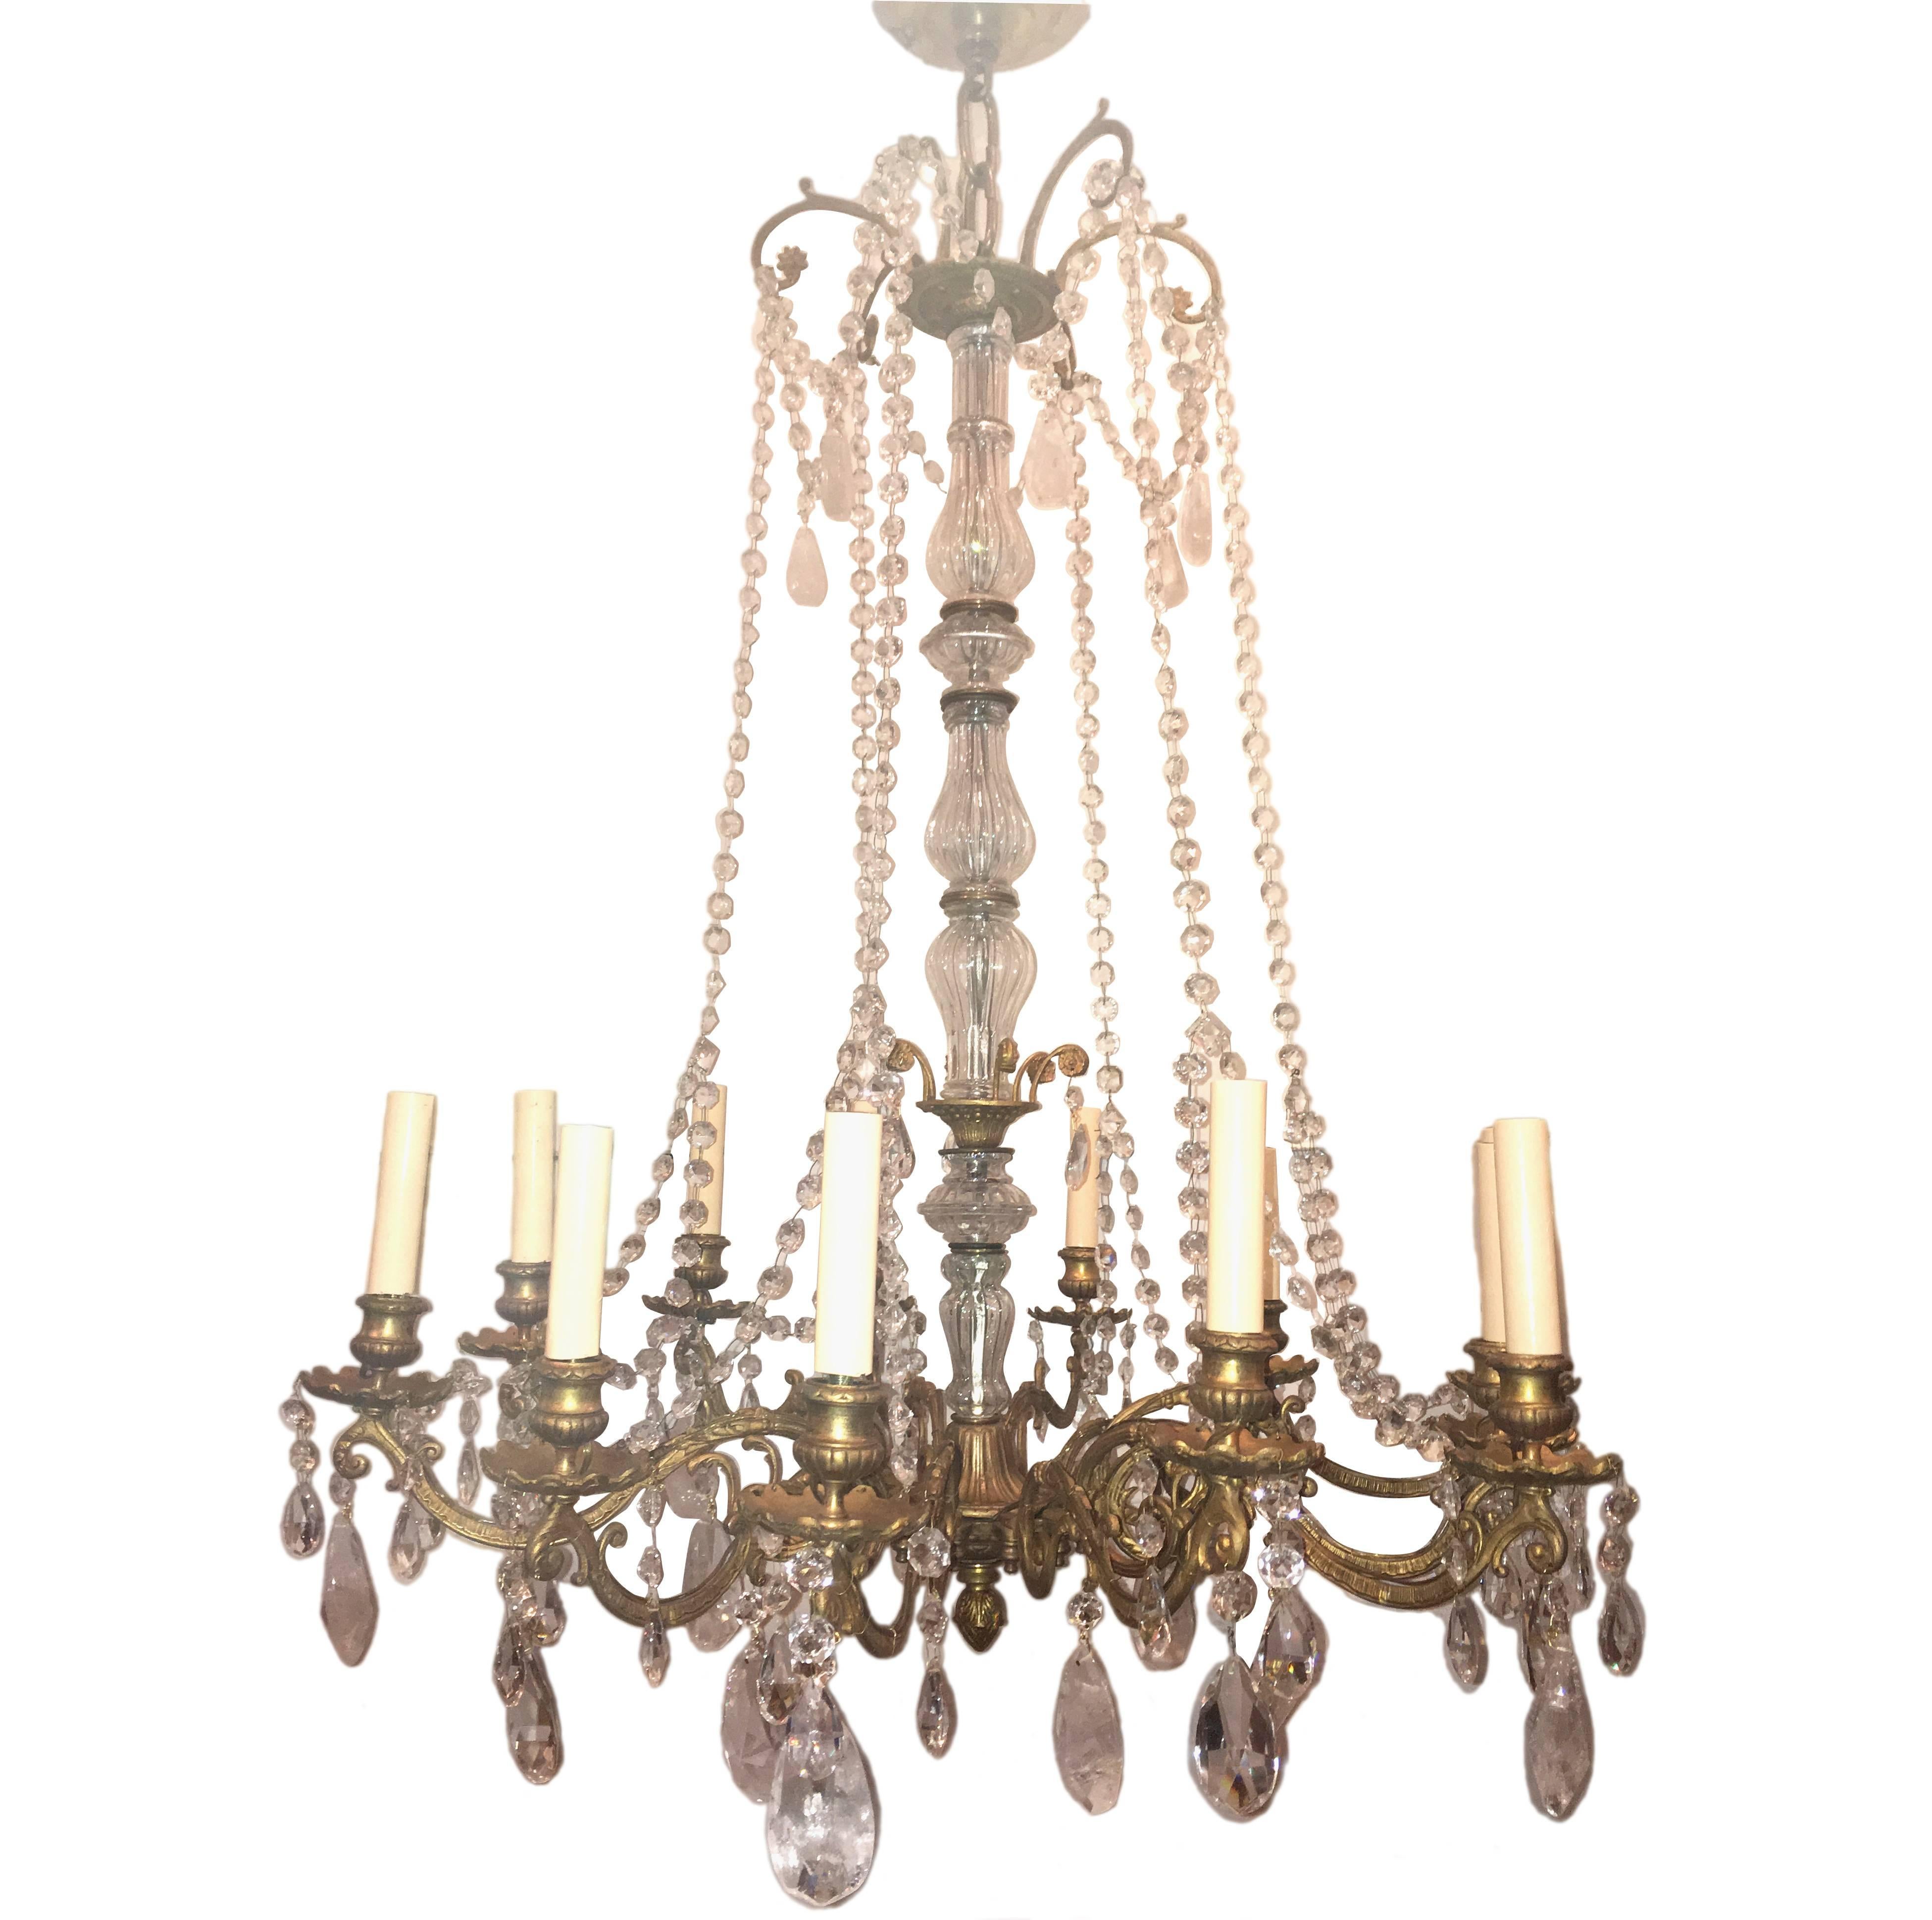 A twelve-arm English circa 1920 neoclassic style gilt bronze chandelier with foliage details on arms and body.

Measurements:
Drop: 38